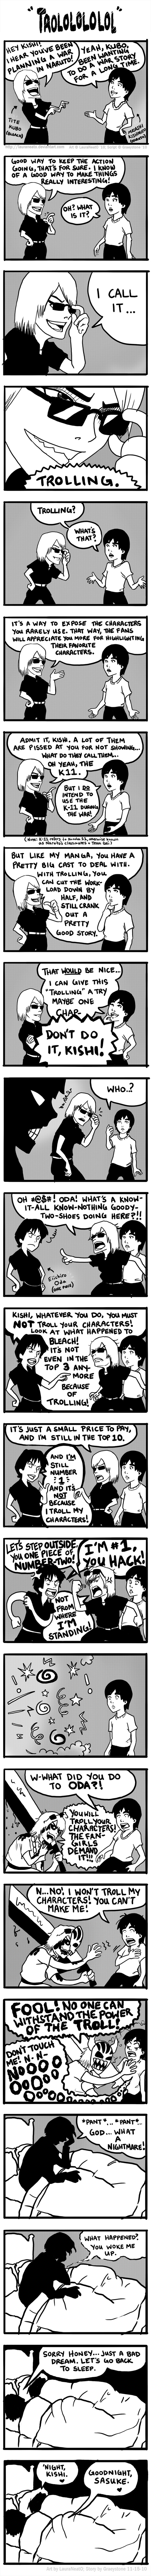 Troll your characters. .